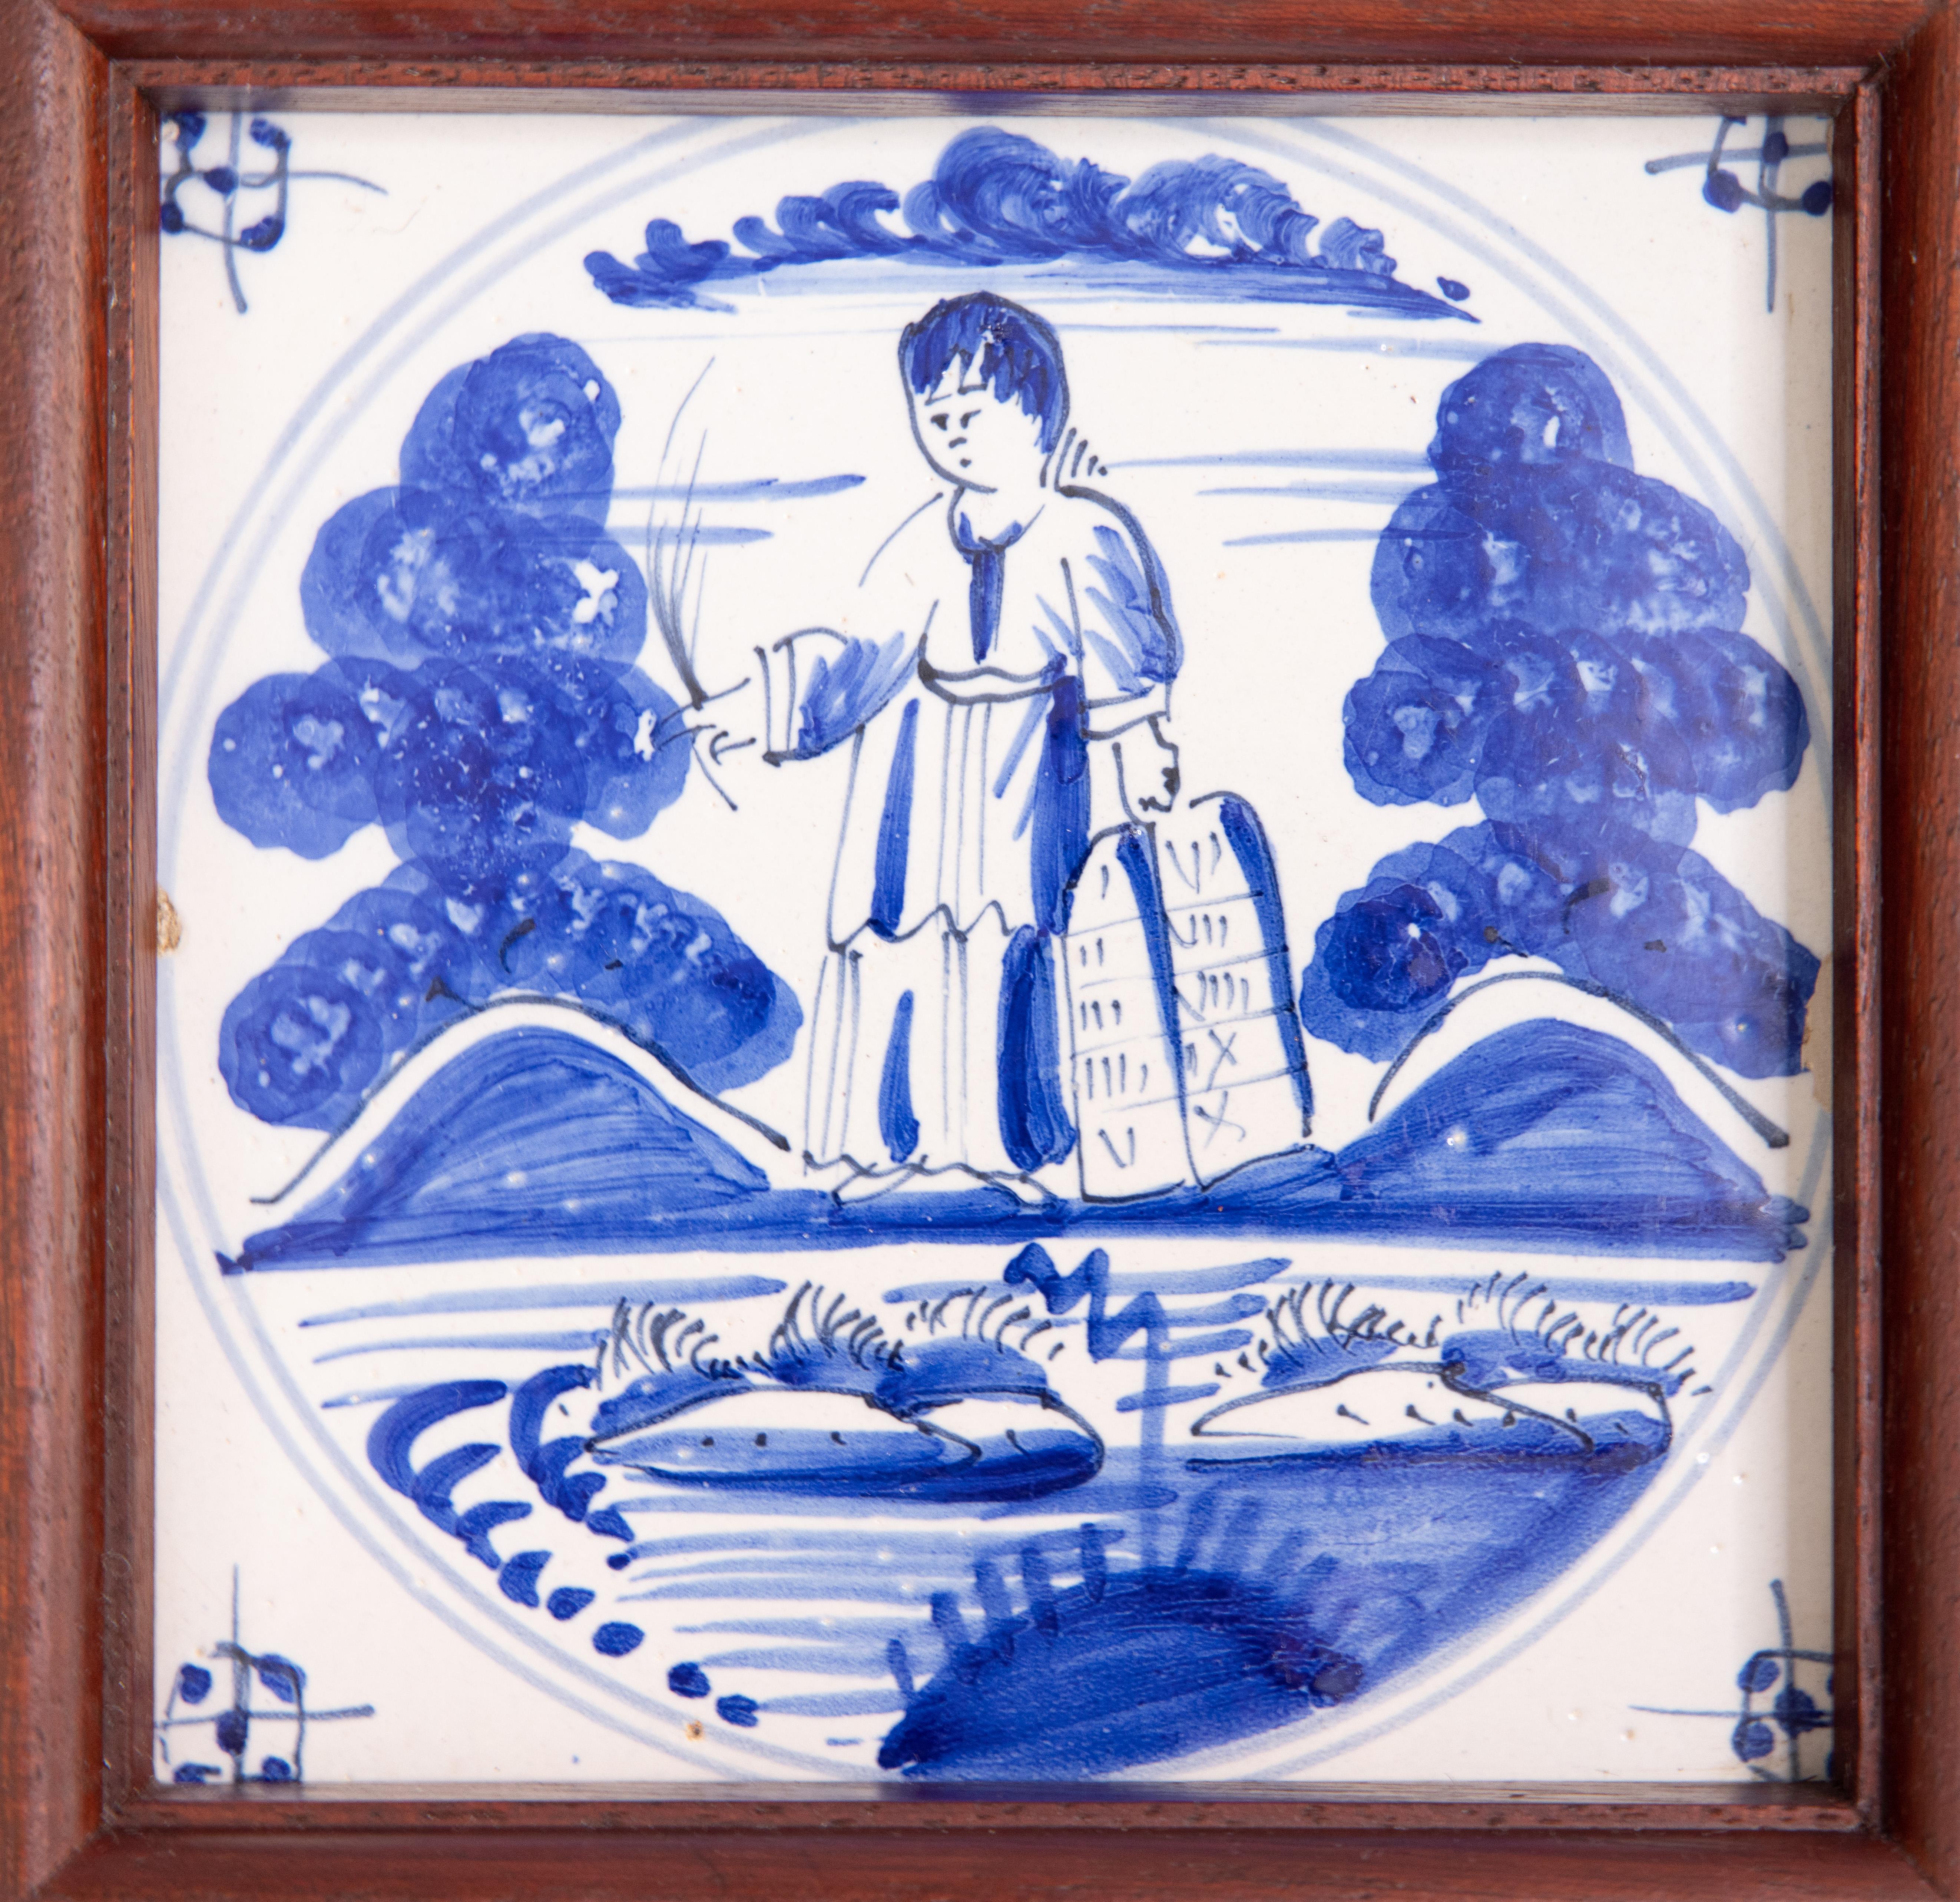 A superb antique 18th-Century Dutch Delft hand painted tile in a custom mahogany wood frame, circa 1750. This fine tile depicts a biblical figure, Moses with the Ten Commandments, in vibrant cobalt blue paint and is in amazing condition considering